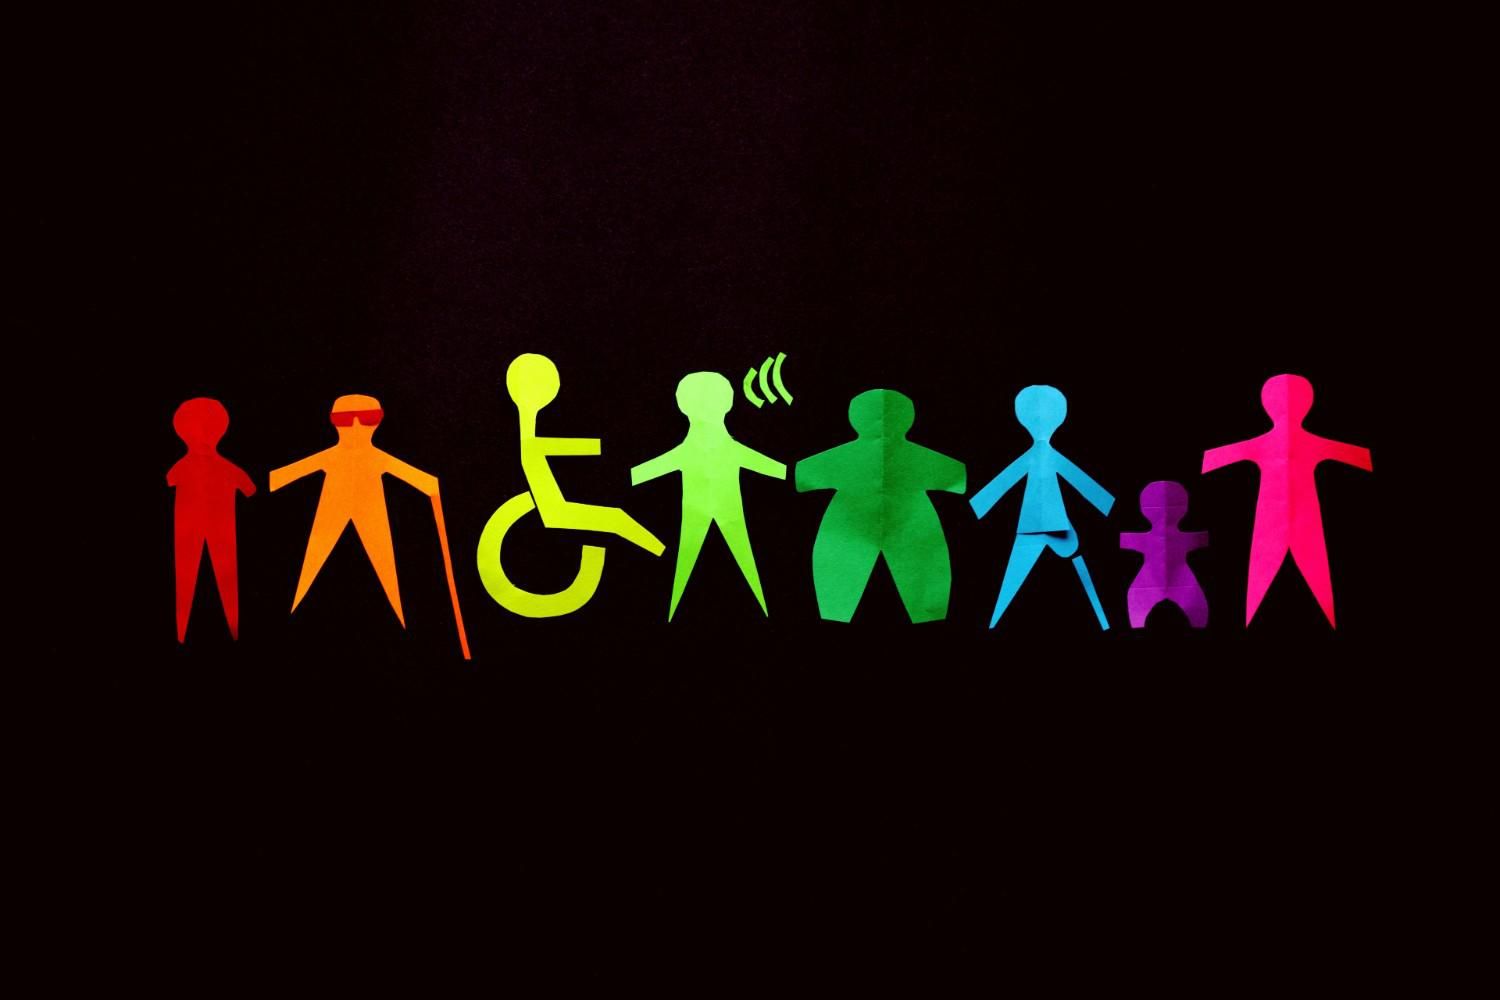 paper dolls of disabled people in colors of the rainbow.